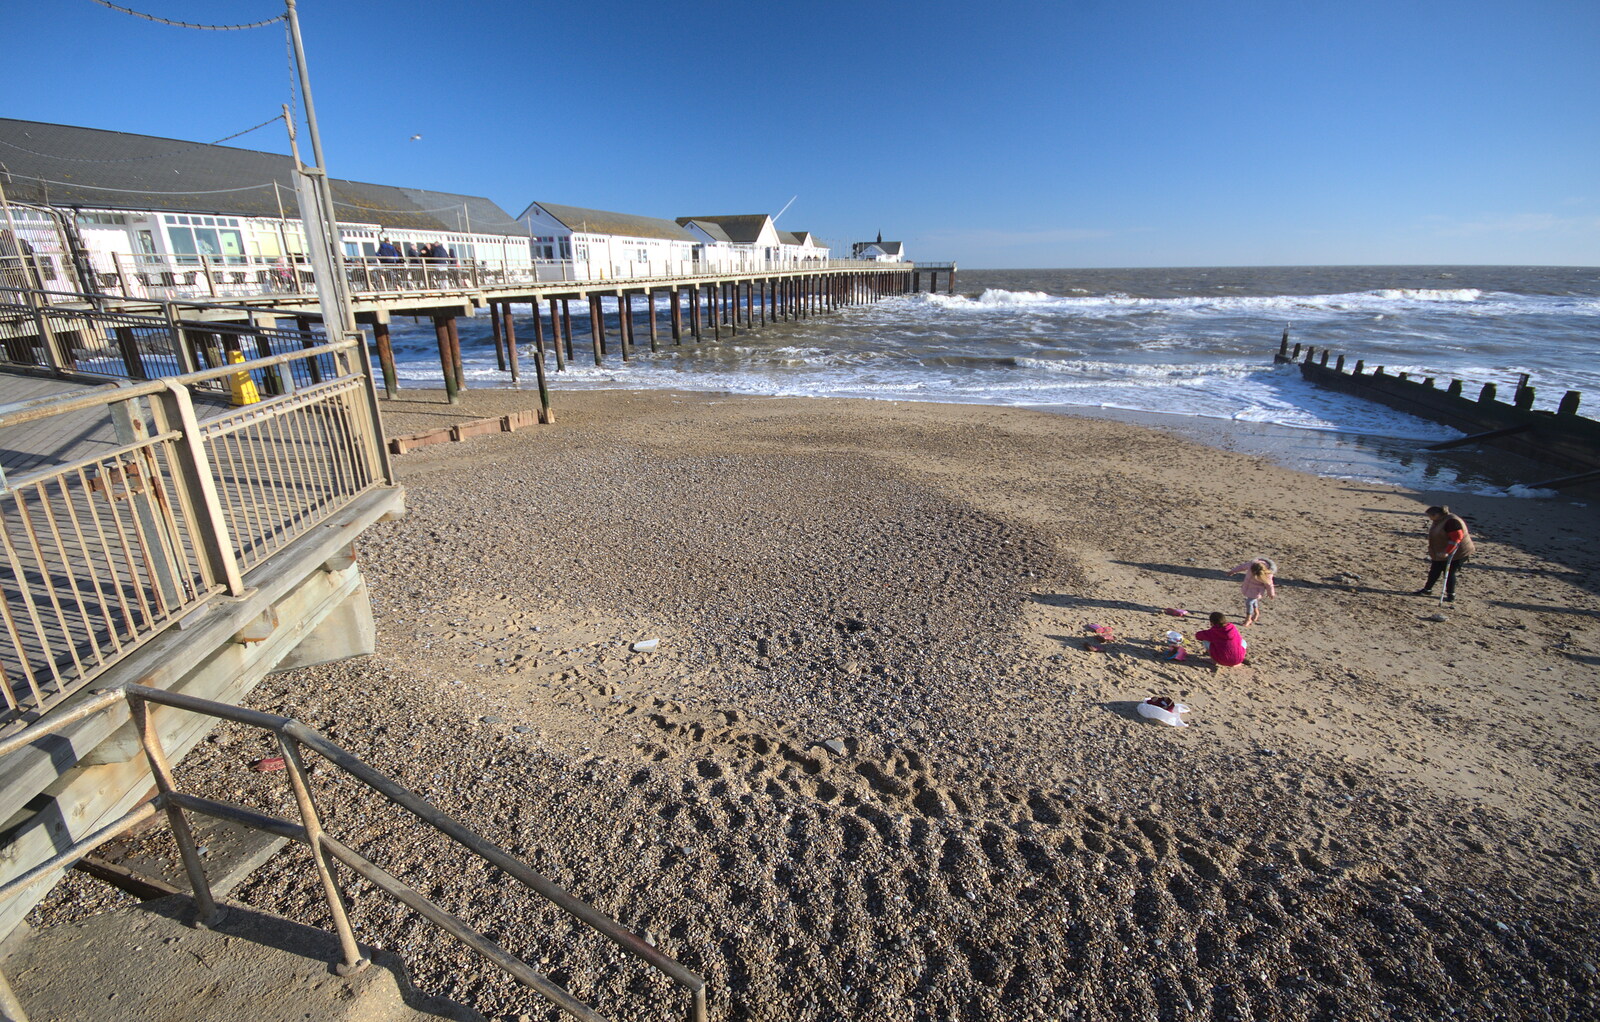 A wide-angled view of the beach from Sunset at the Beach, Southwold, Suffolk - 18th November 2018